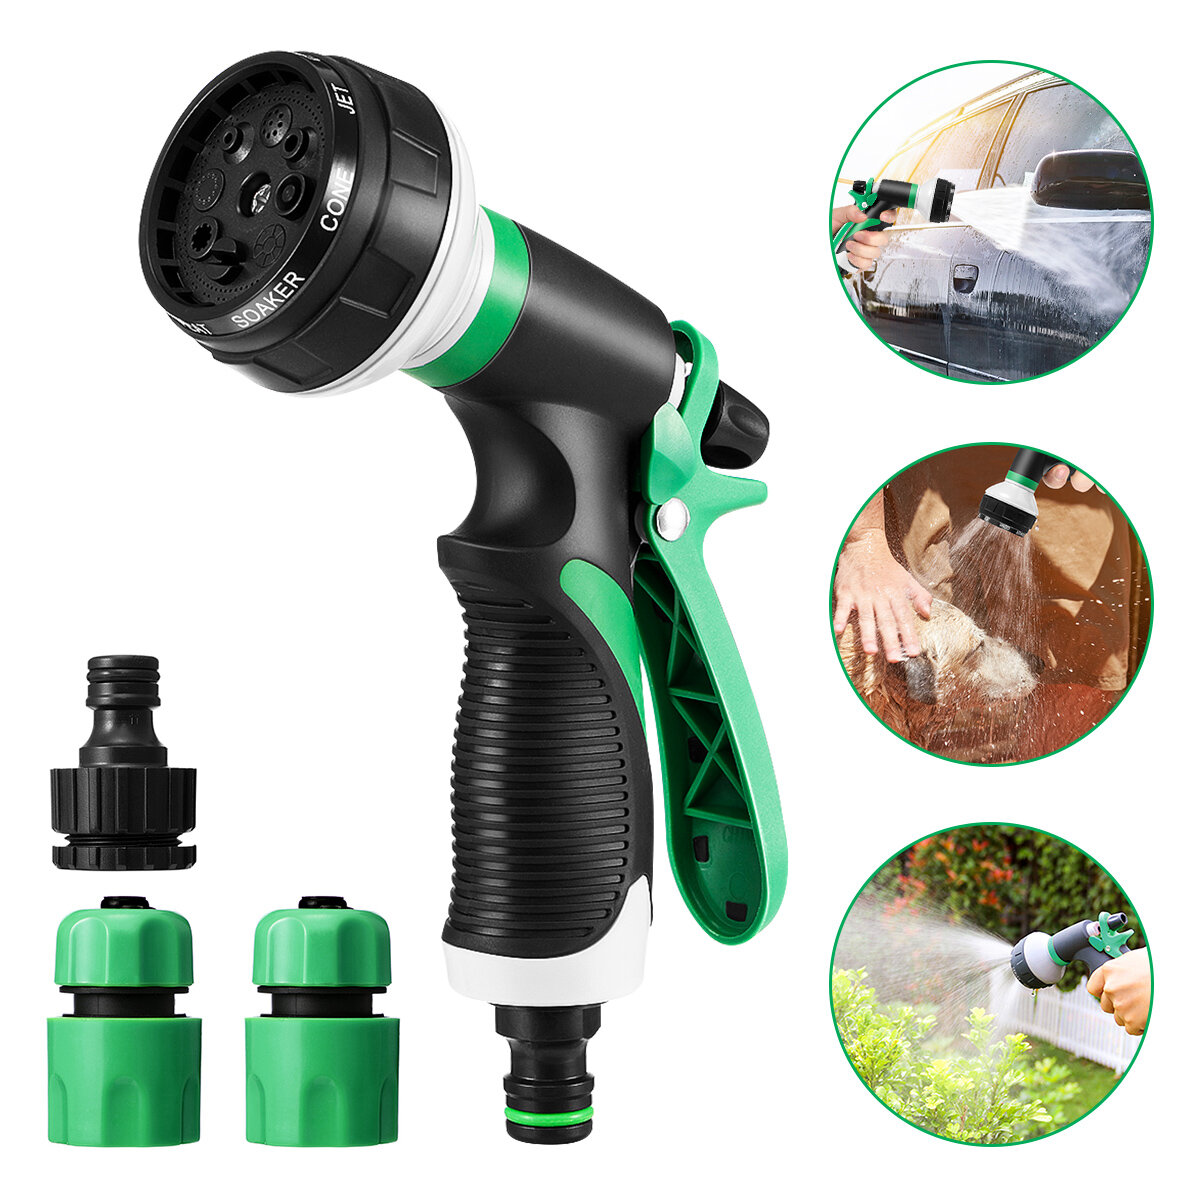 Multifunctional Graden Hose Spray Nozzle 8 Watering Modes Saving-water Watering Spear with Anti-slip Handle